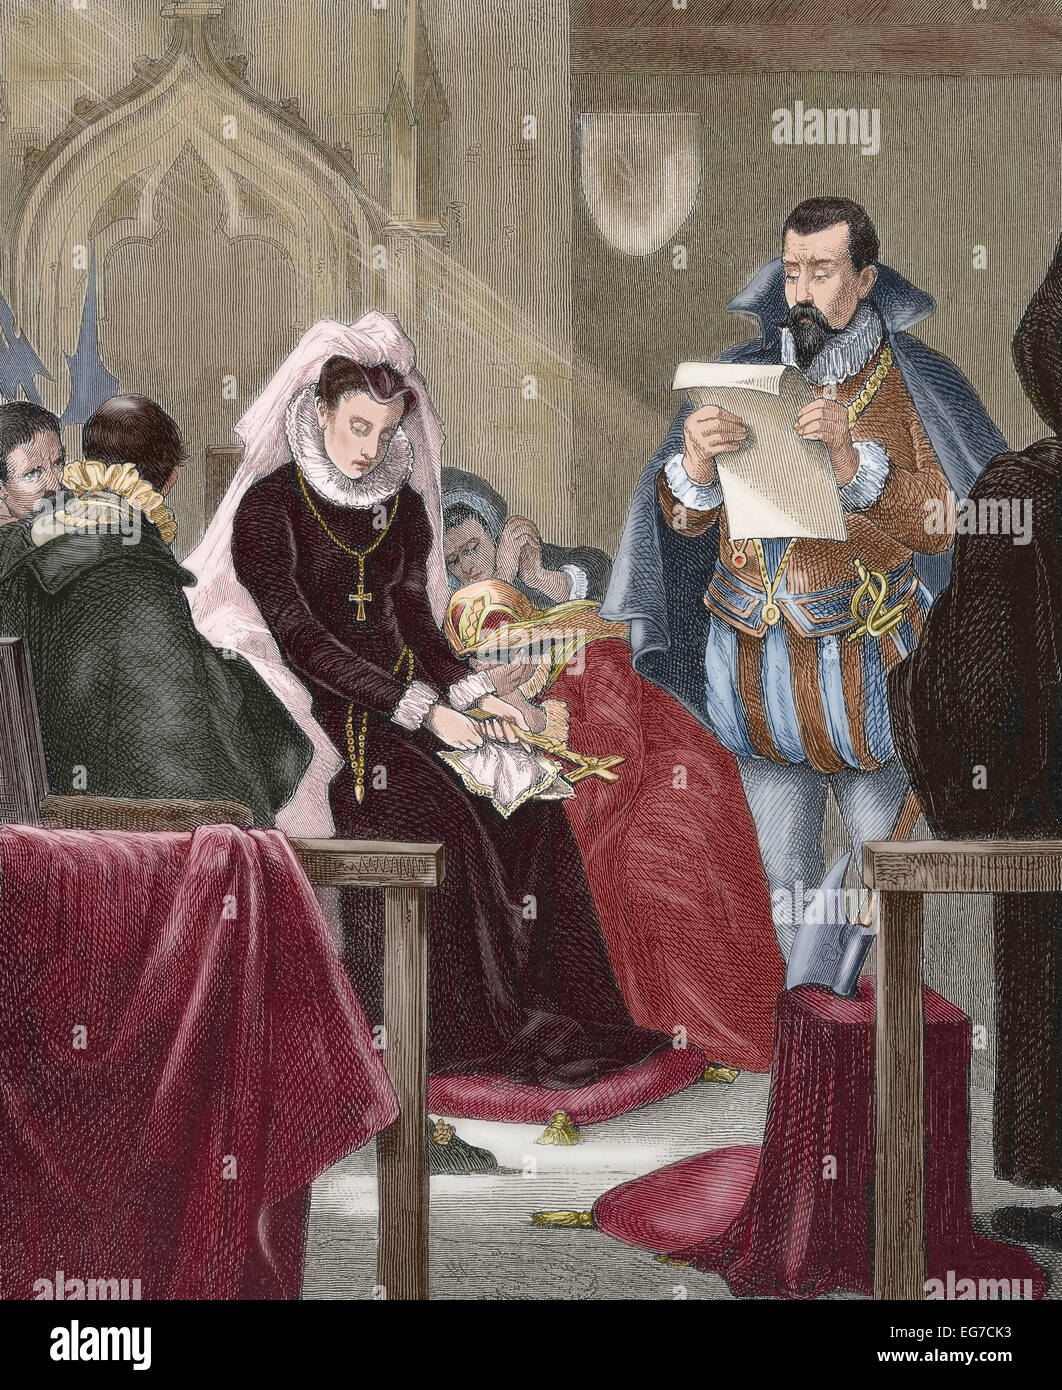 Mary, Queen of Scots (1542-1587) and Queen consort of France. Mary Stuart on the scaffold. Engraving in 'Almanaque de la Ilustracion', 1880. Colored. Stock Photo